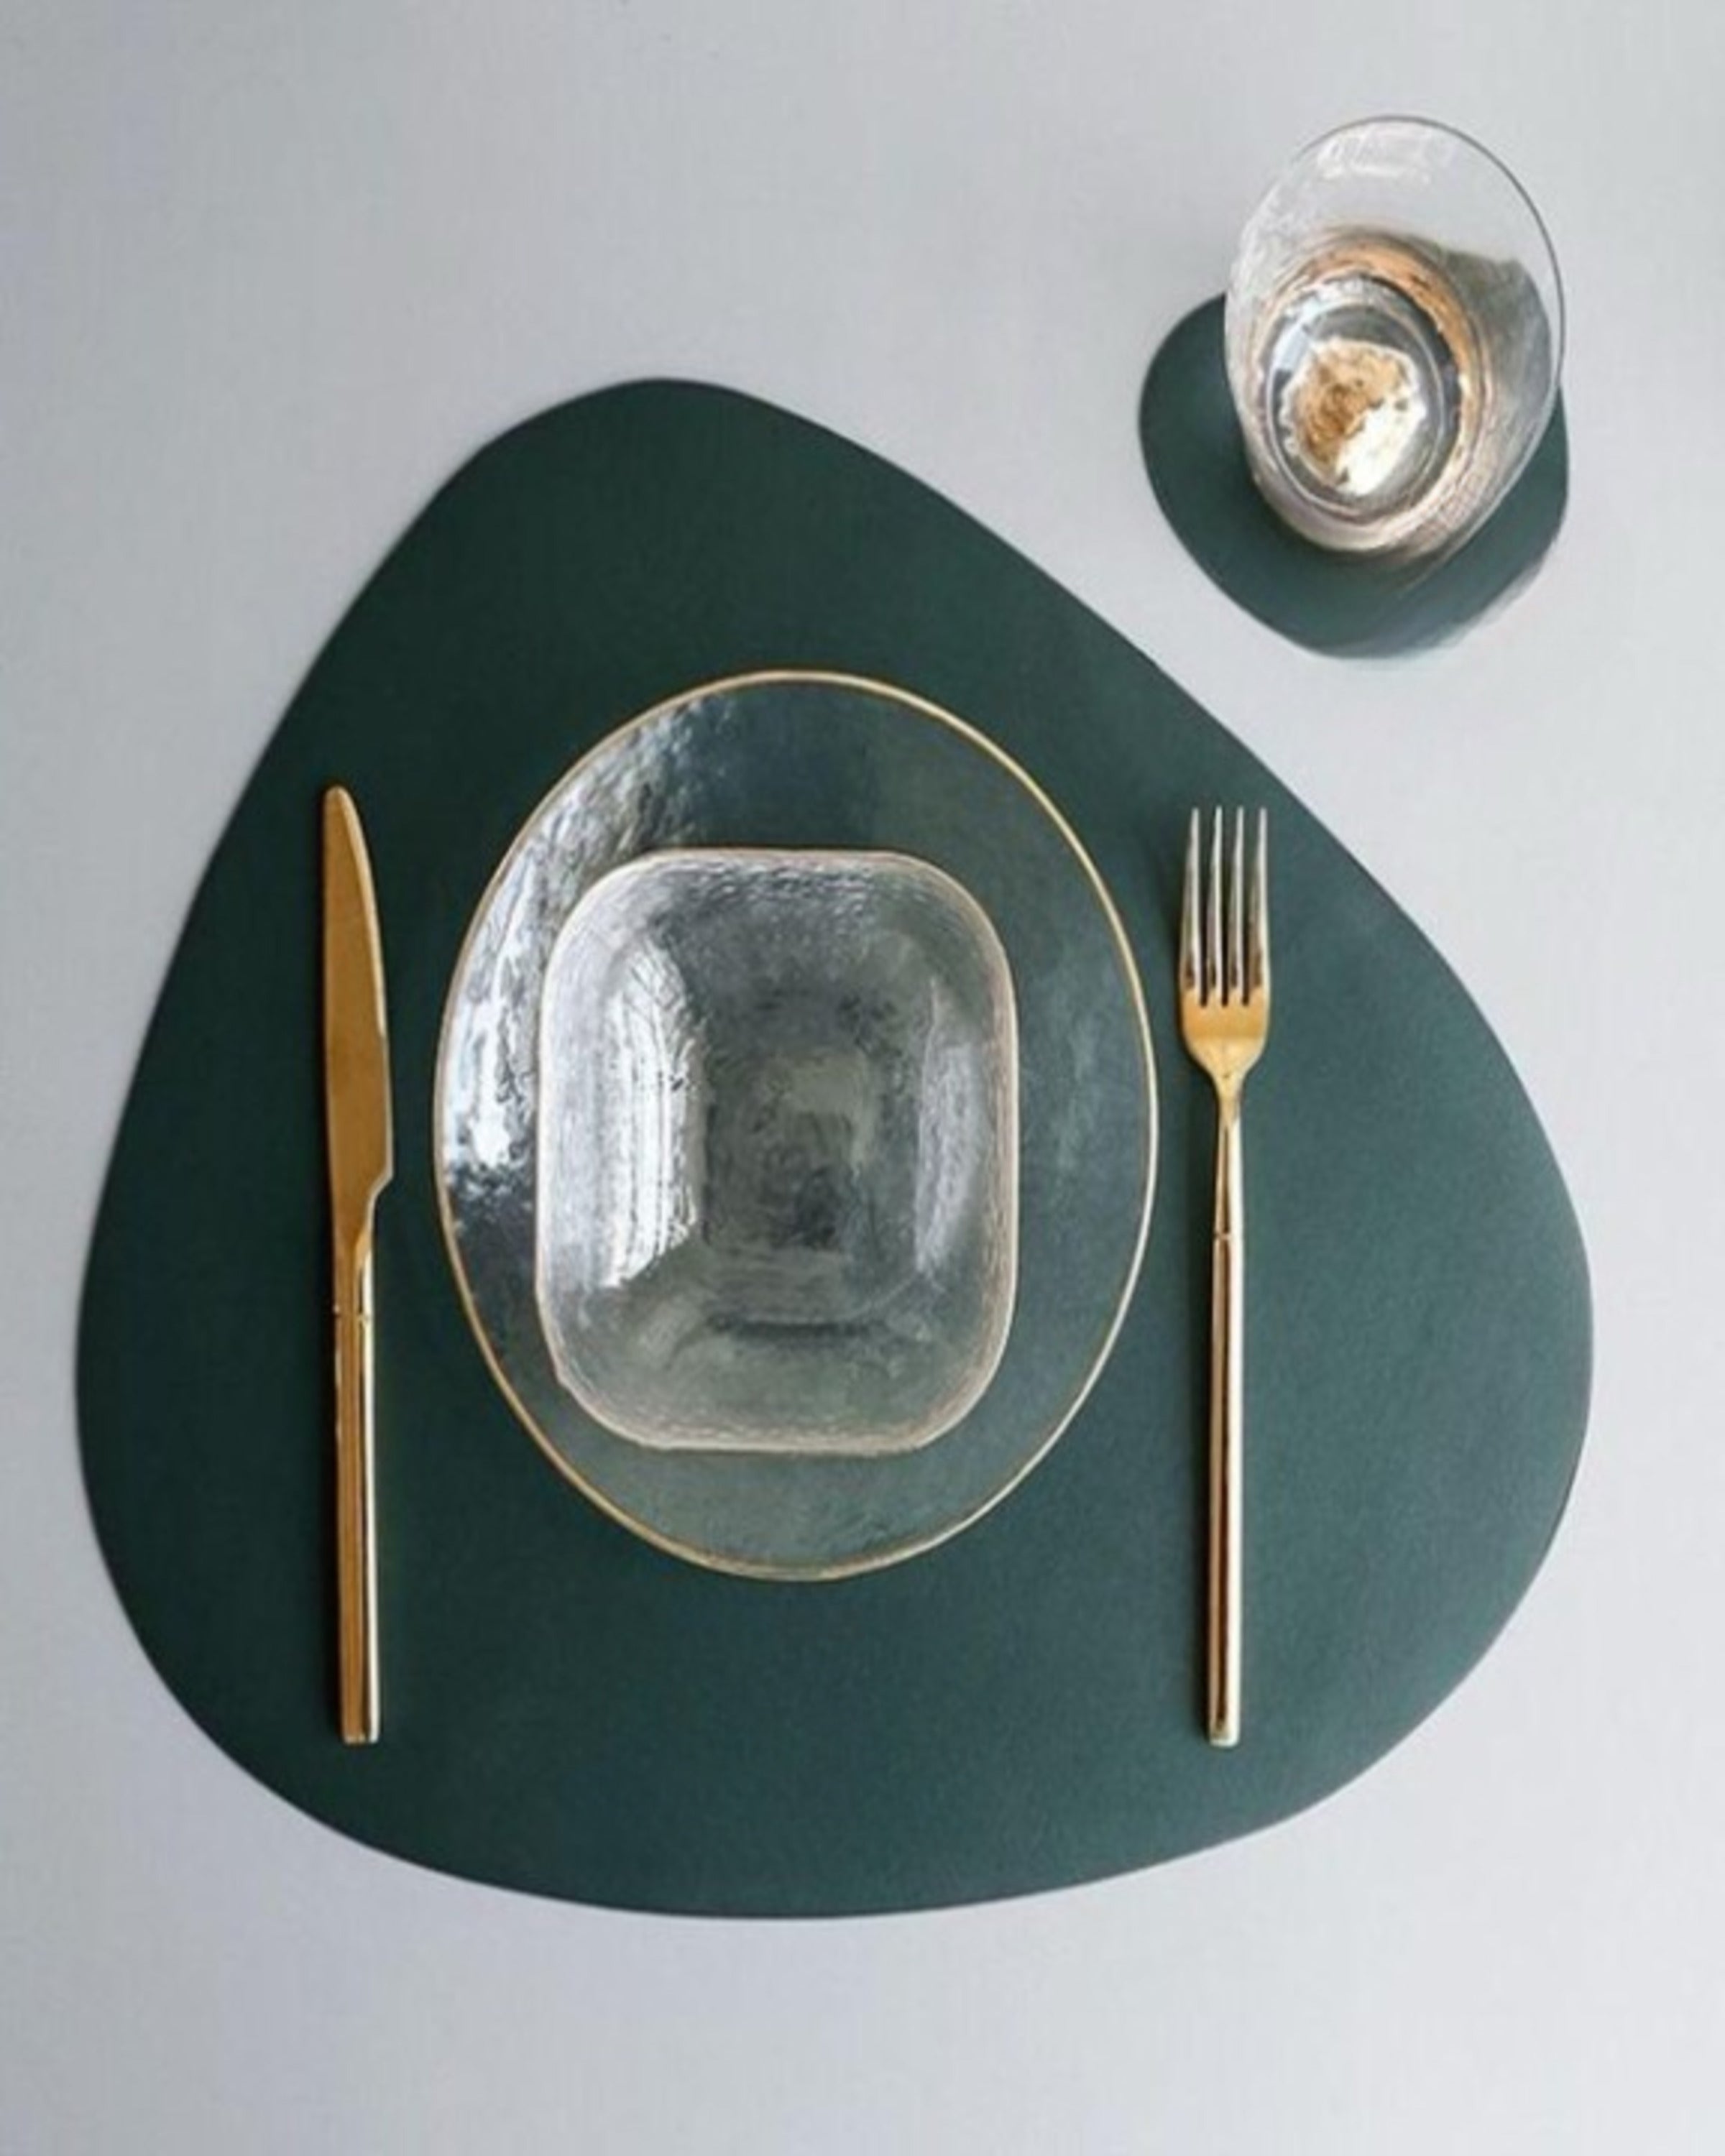 Executive Green Leather Table Mats ANGIE HOMES